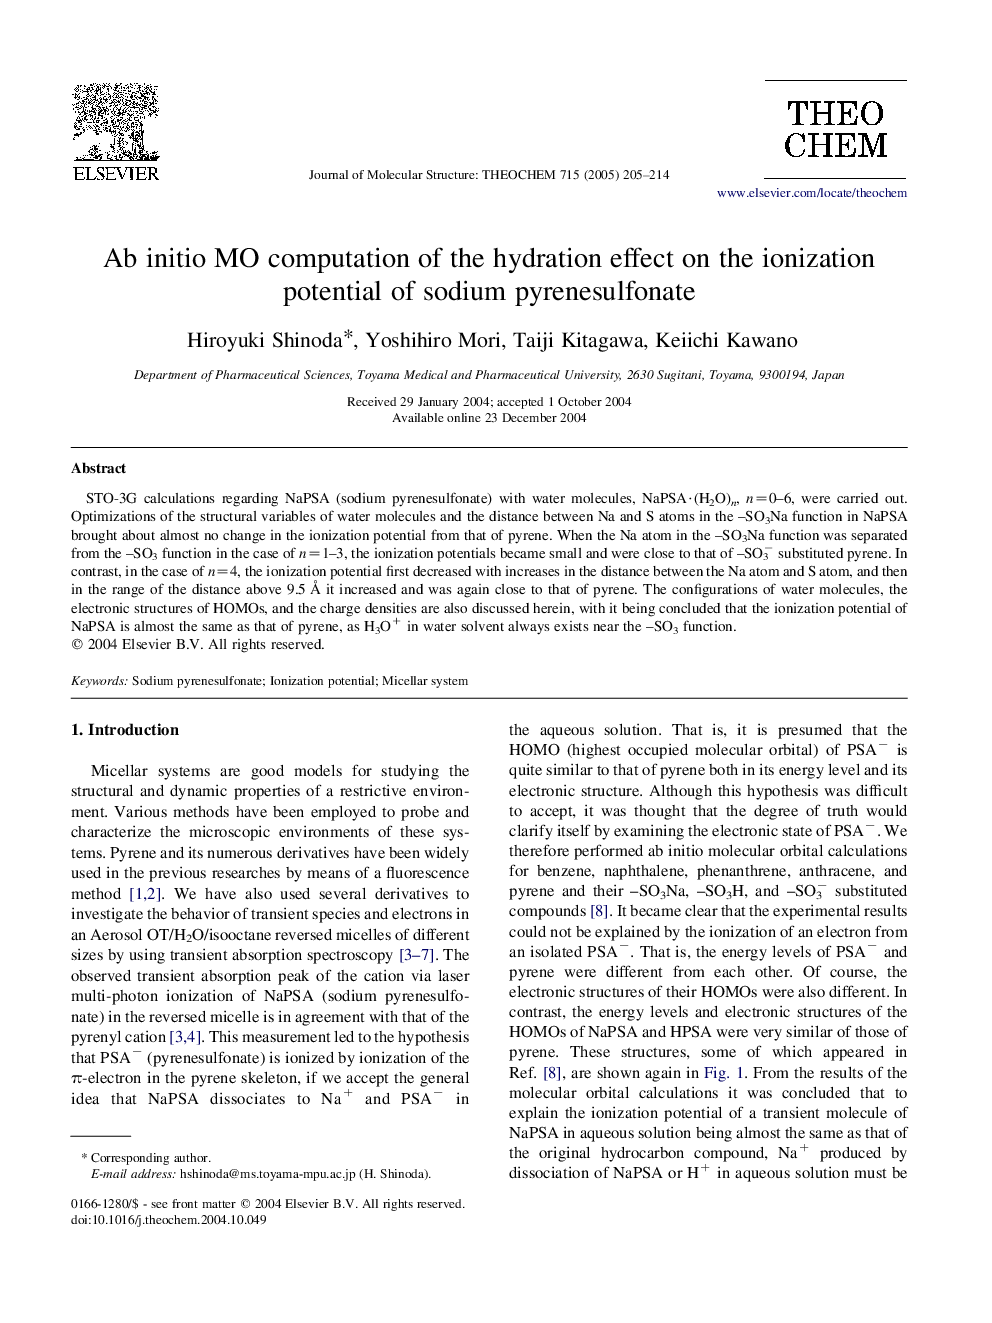 Ab initio MO computation of the hydration effect on the ionization potential of sodium pyrenesulfonate